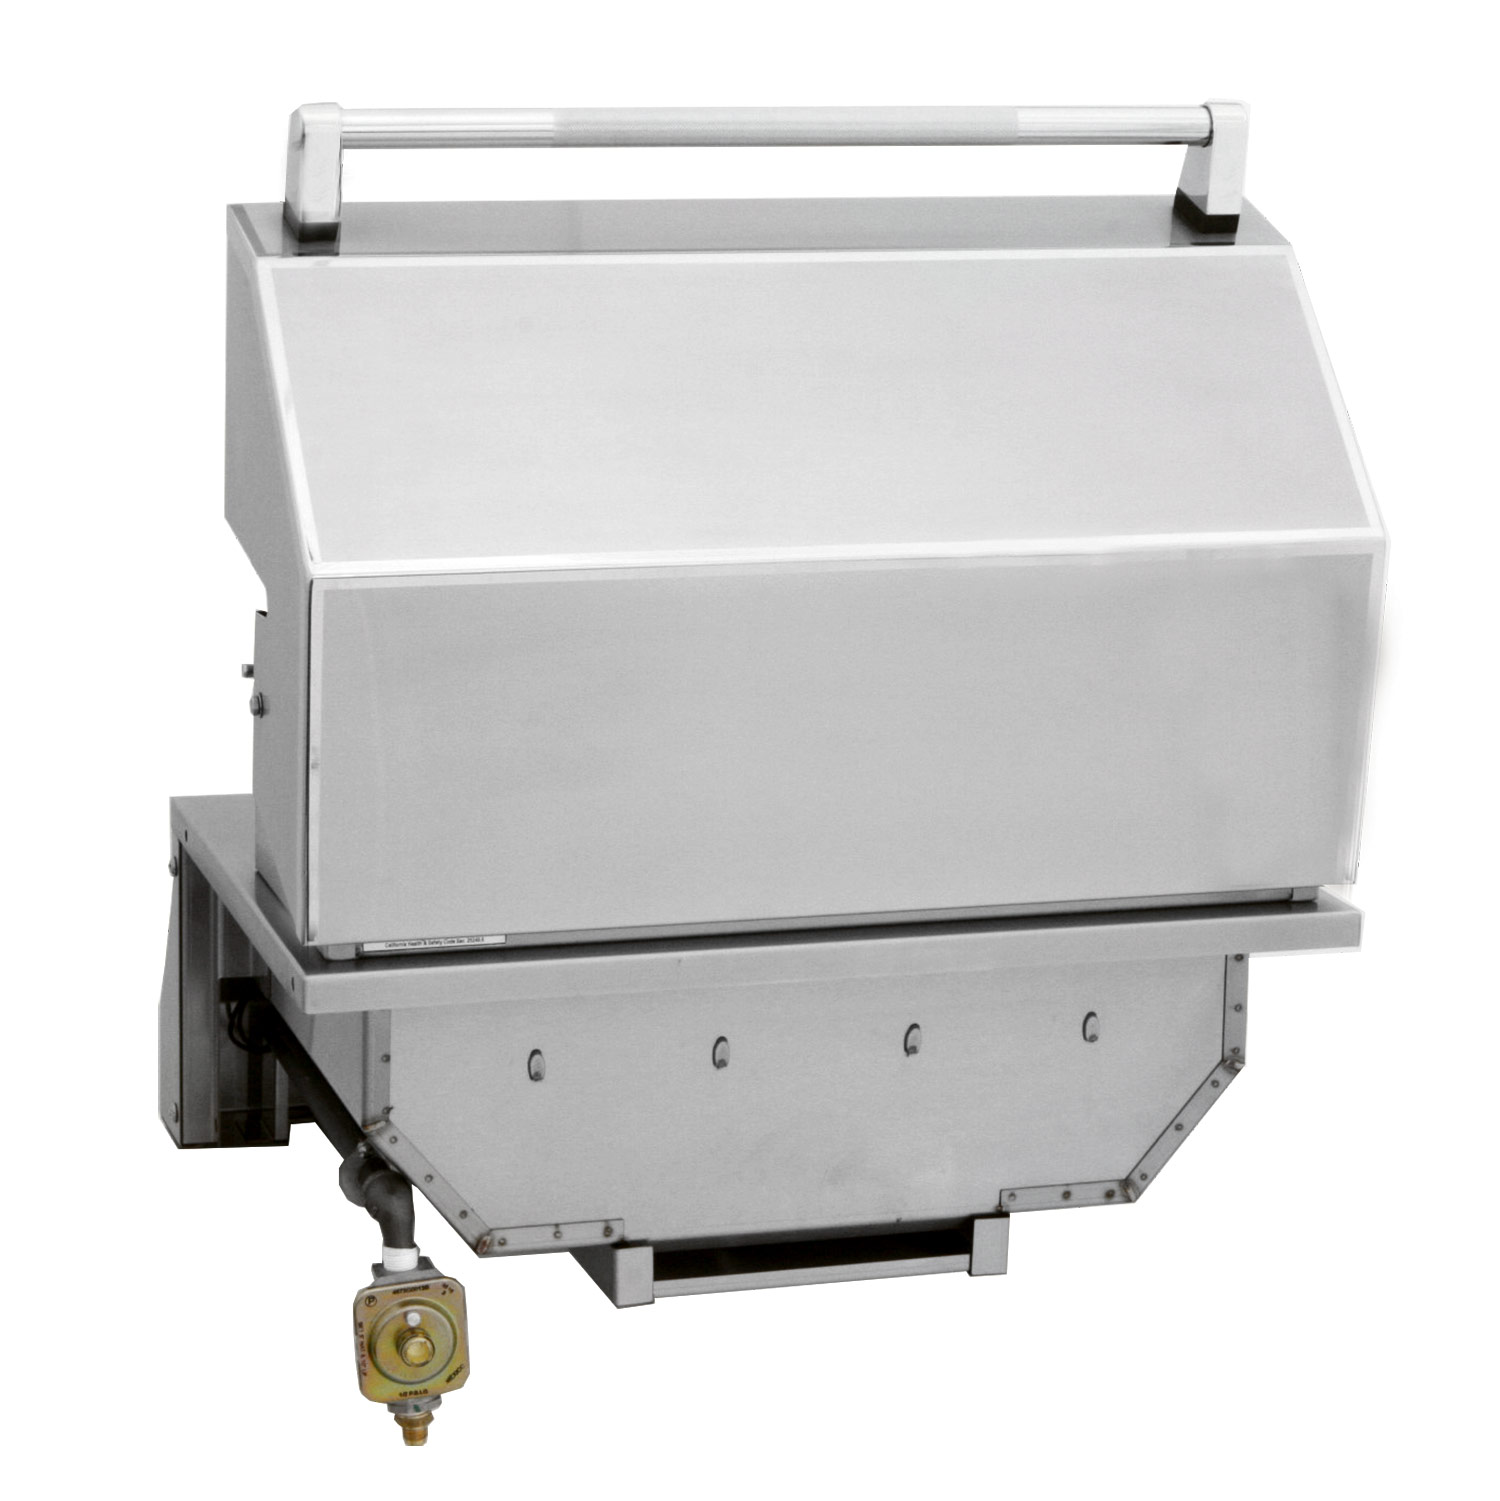 Solaire Standard Infrared Built-In Grill, 27-Inches, Natural Gas - image 5 of 6